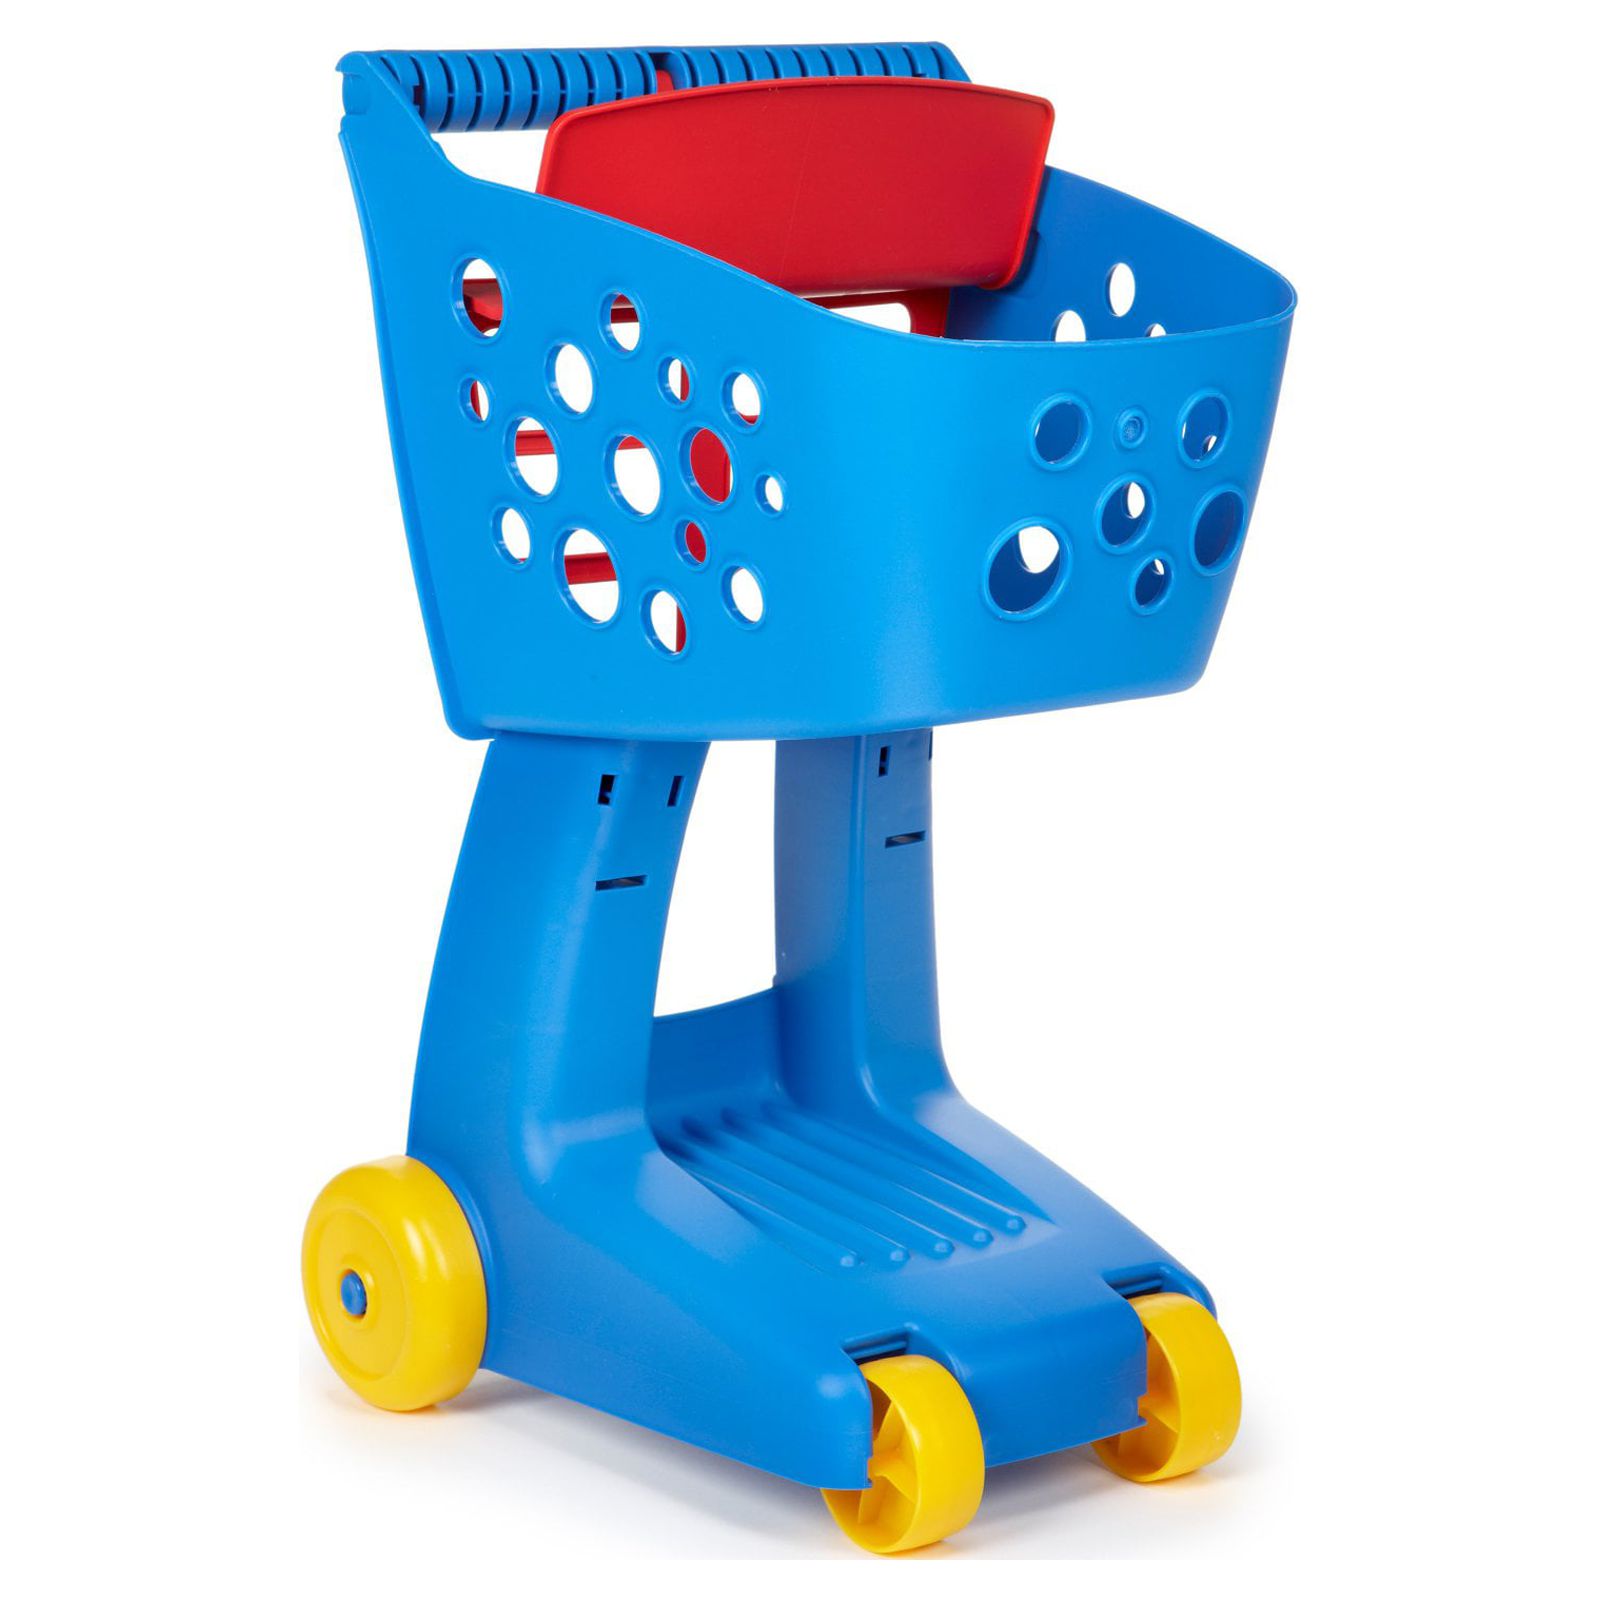 Little Tikes Lil Shopper - Blue For Girls and Boys Ages 1 Year + - image 5 of 5